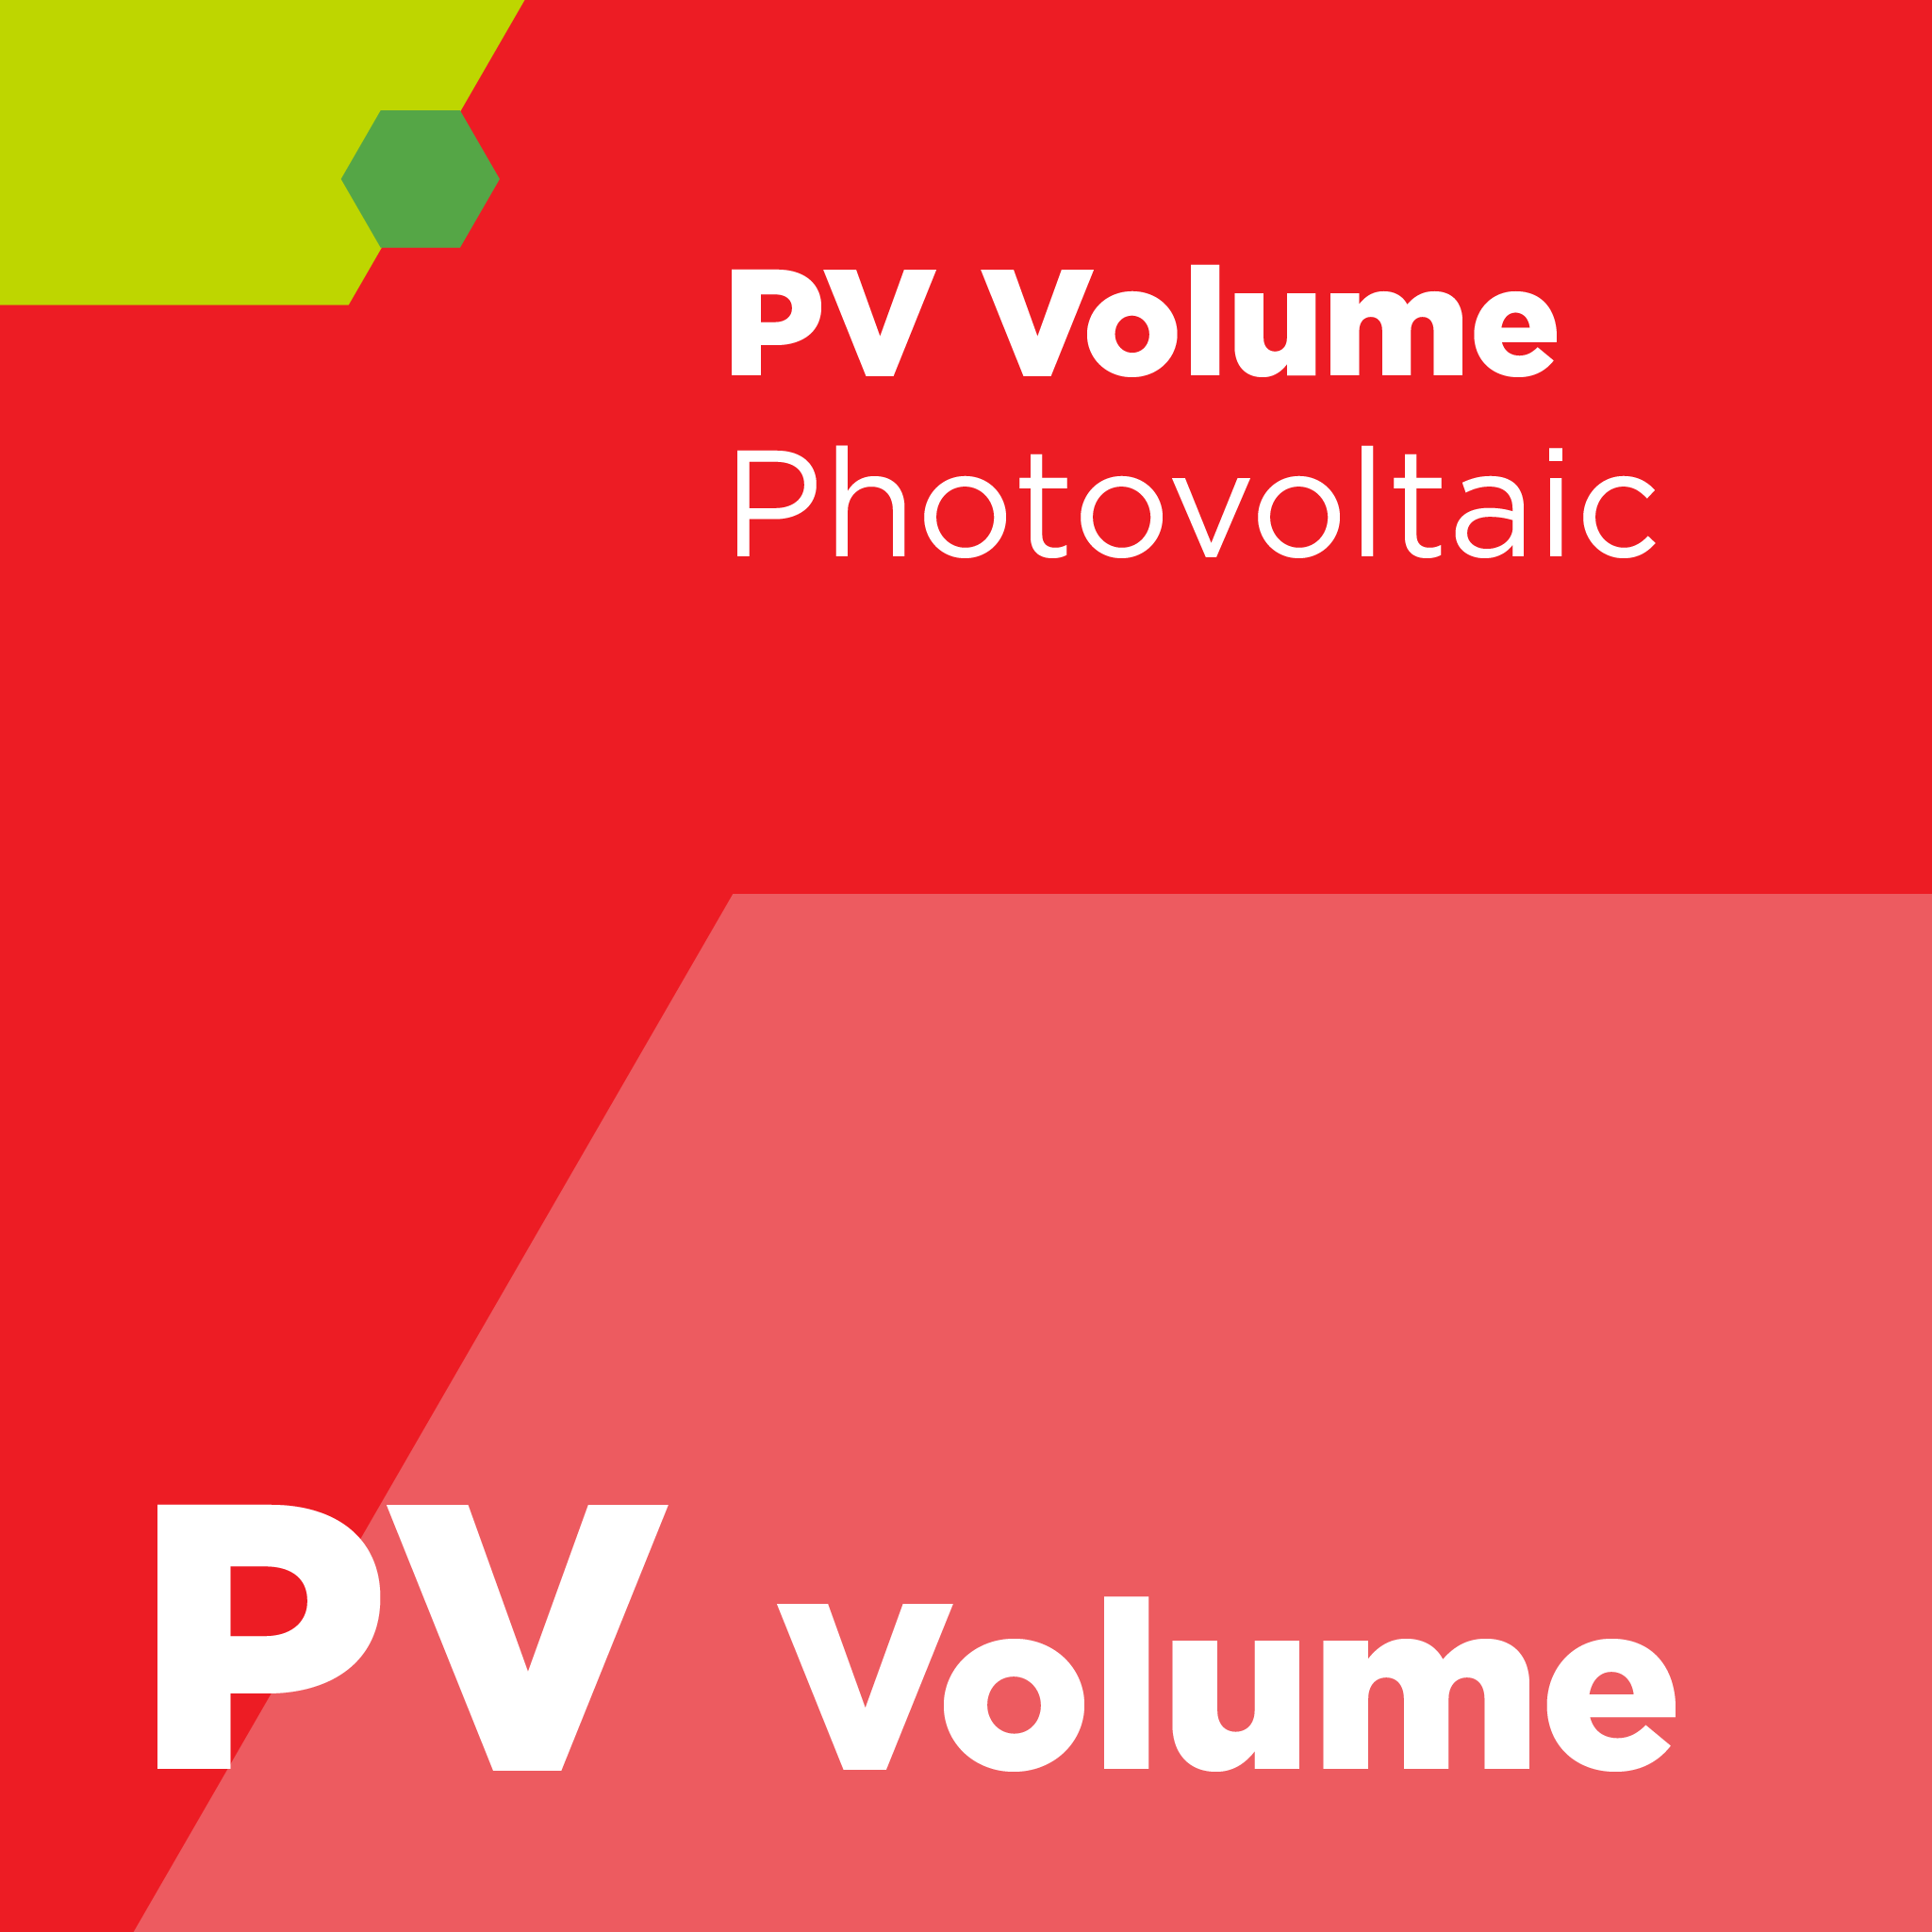 PV03000 - SEMI PV30 - Specification for 2-Propanol Used in Photovoltaic Applications